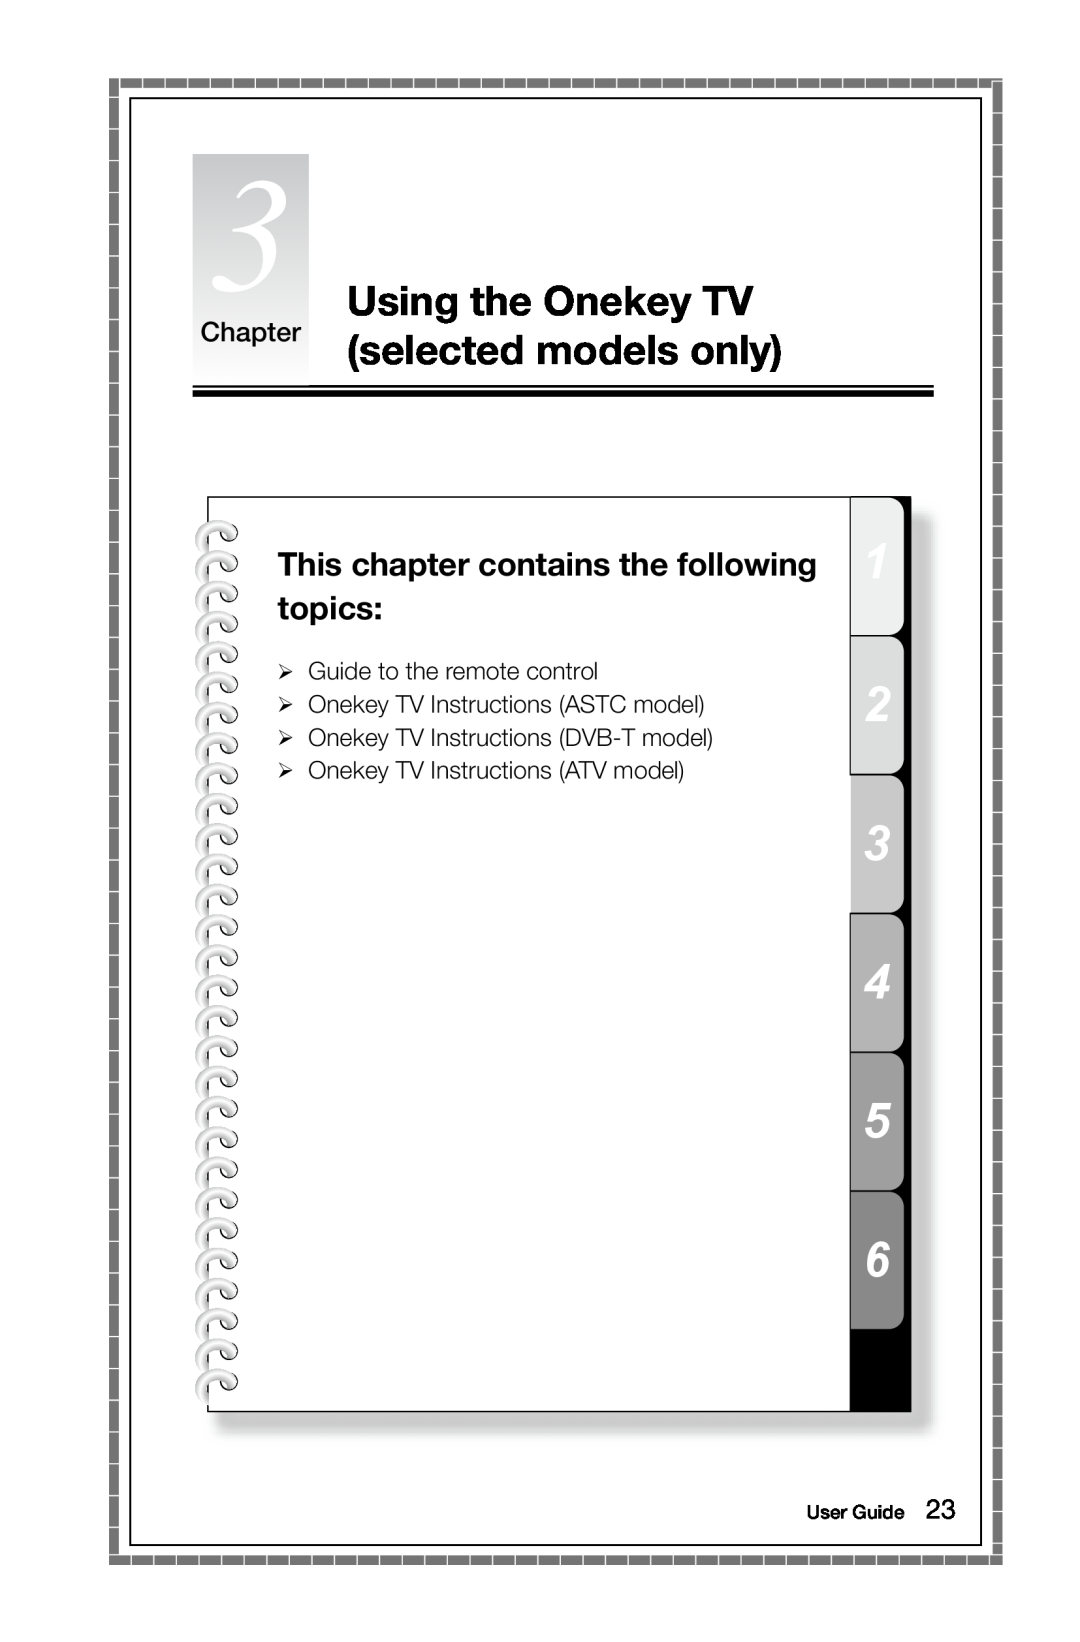 Lenovo 2566 [B340] 10099, 97 Using the Onekey TV Chapter selected models only, This chapter contains the following topics 